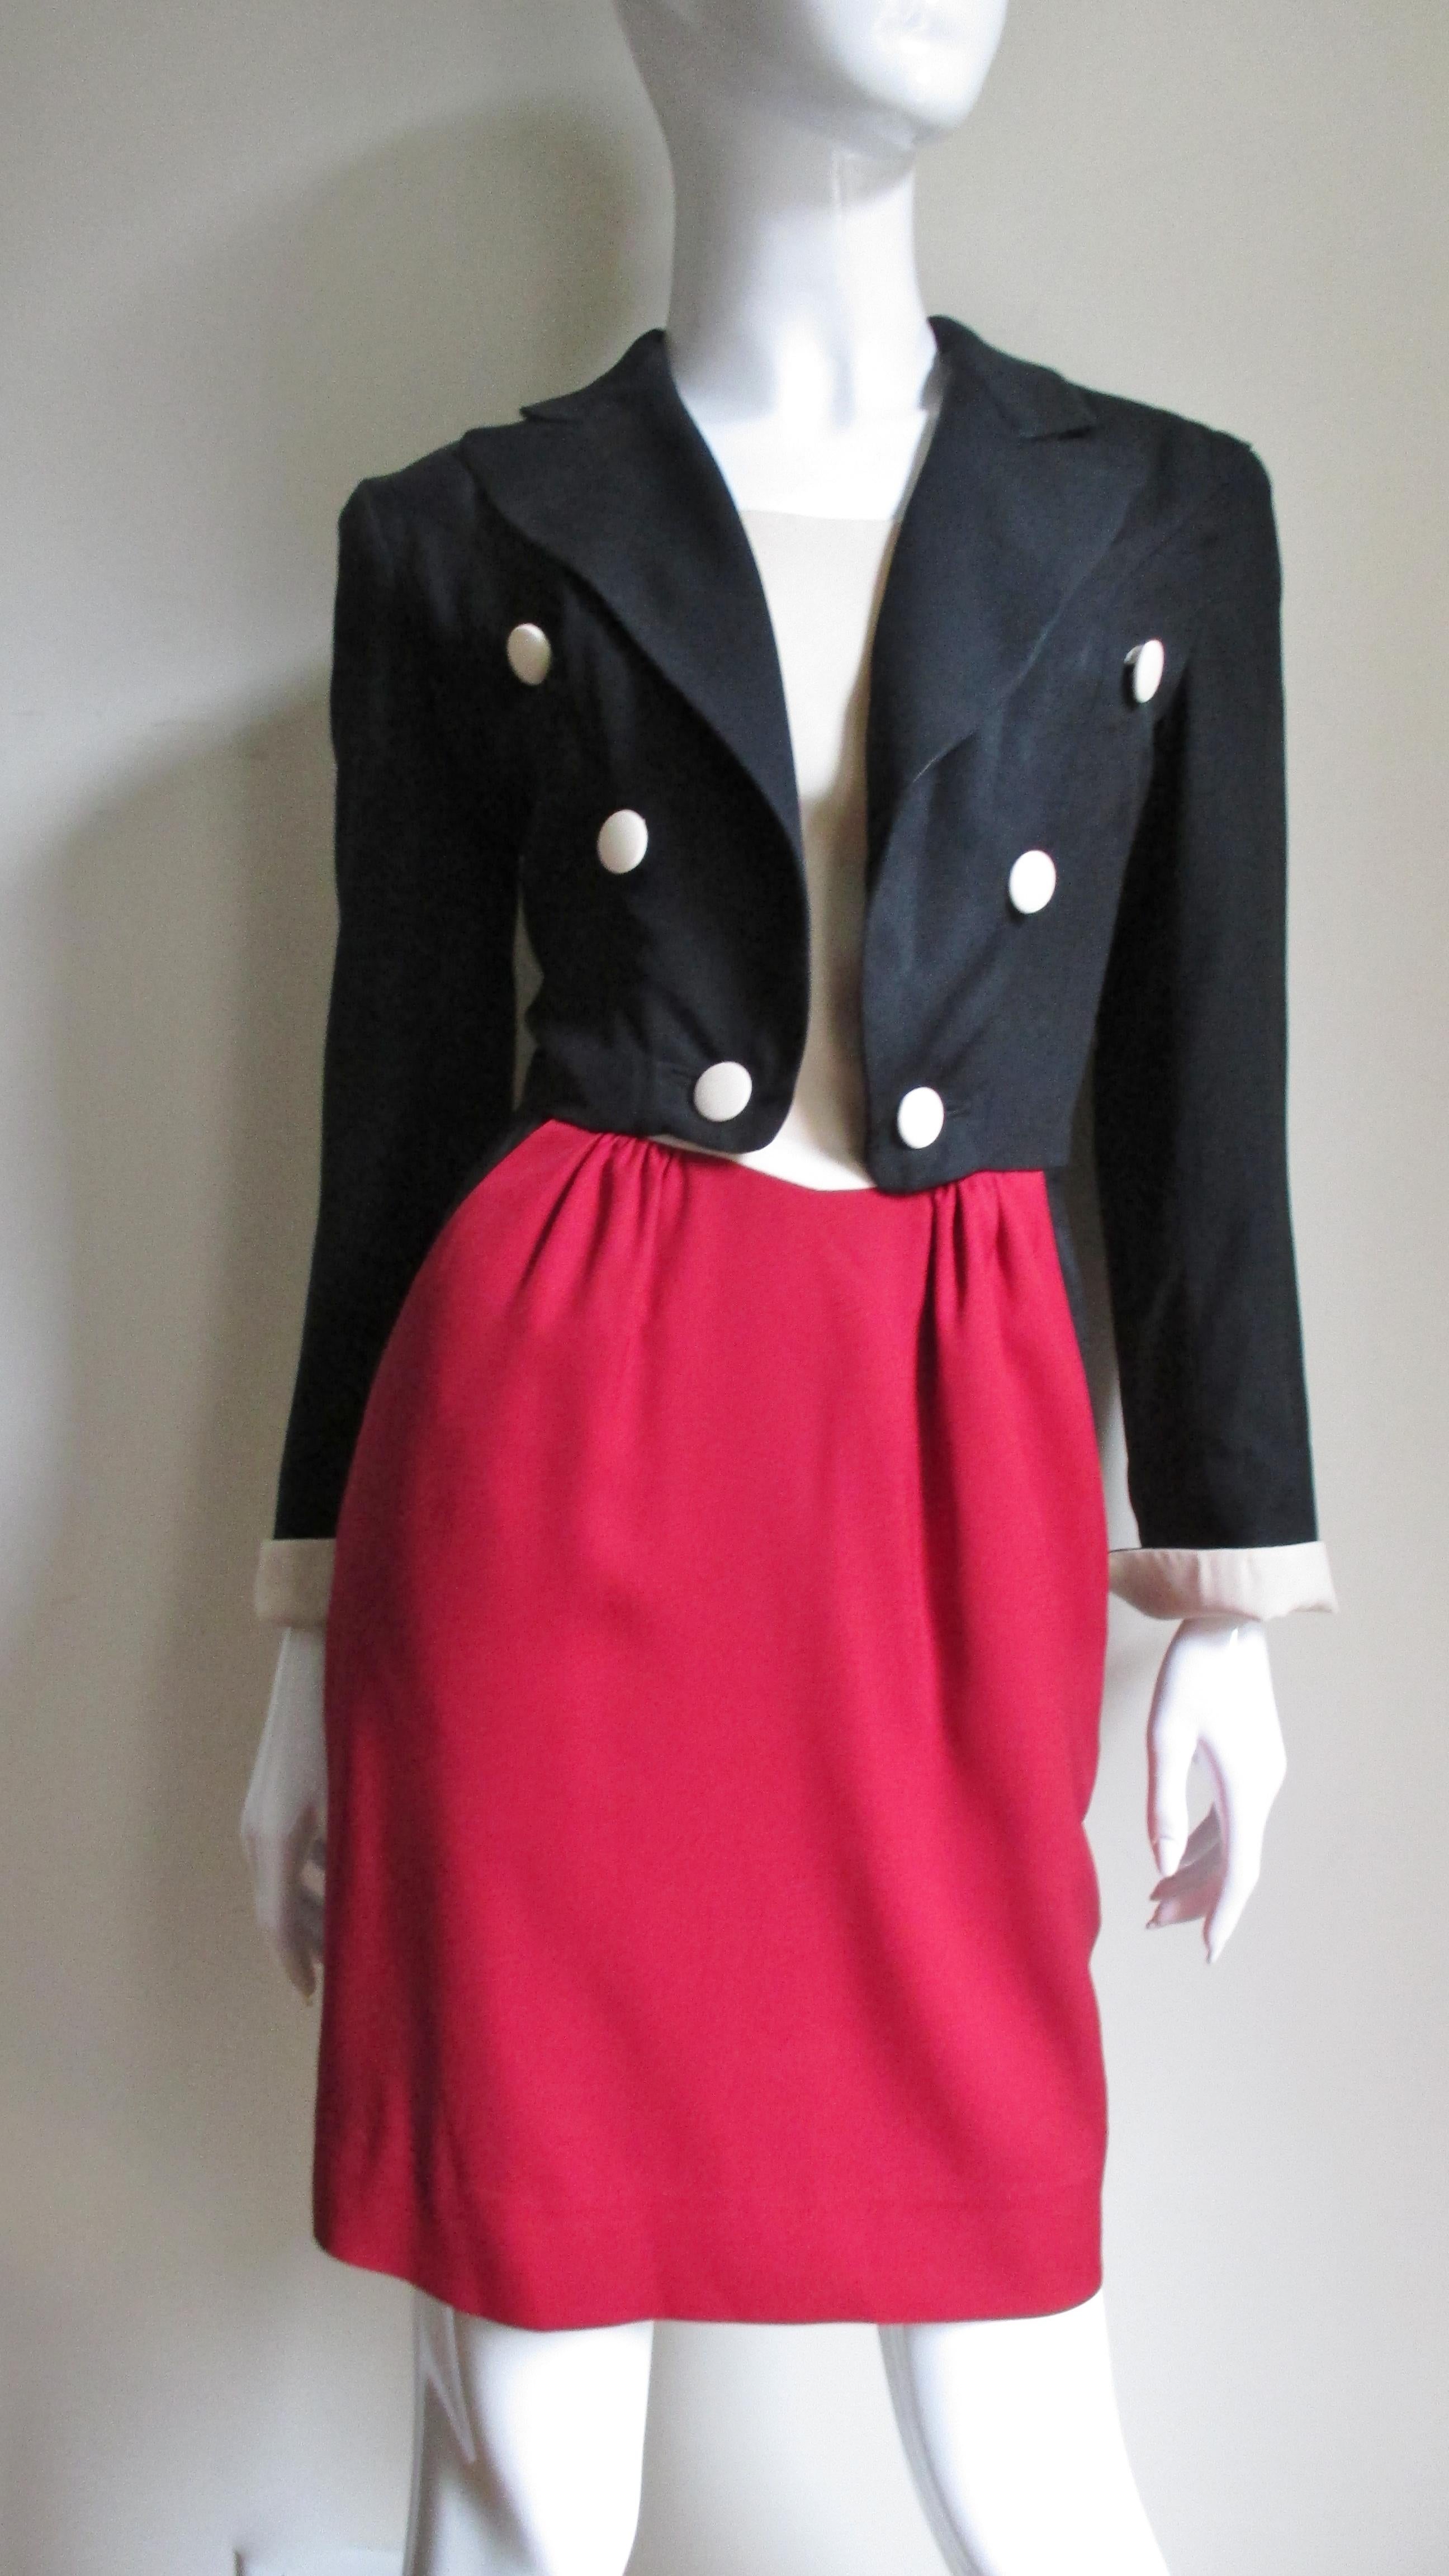  Moschino Color Block Tuxedo Dress 1990s In Good Condition For Sale In Water Mill, NY